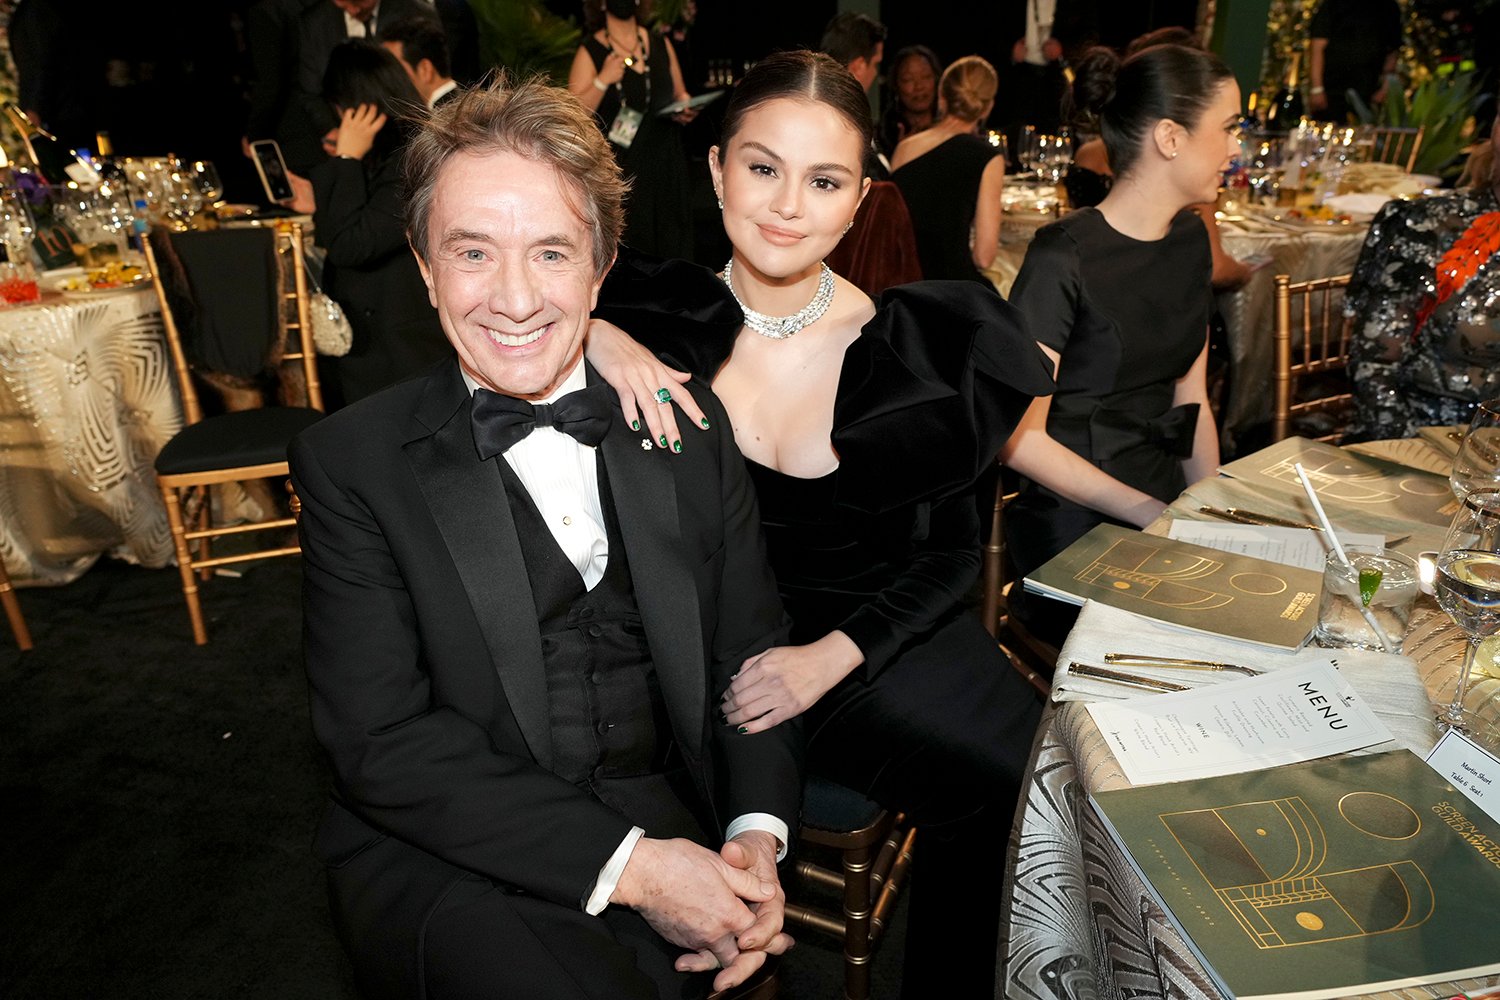 Only Murders in the Building stars Martin Short and Selena Gomez attend the SAG Awards 2022